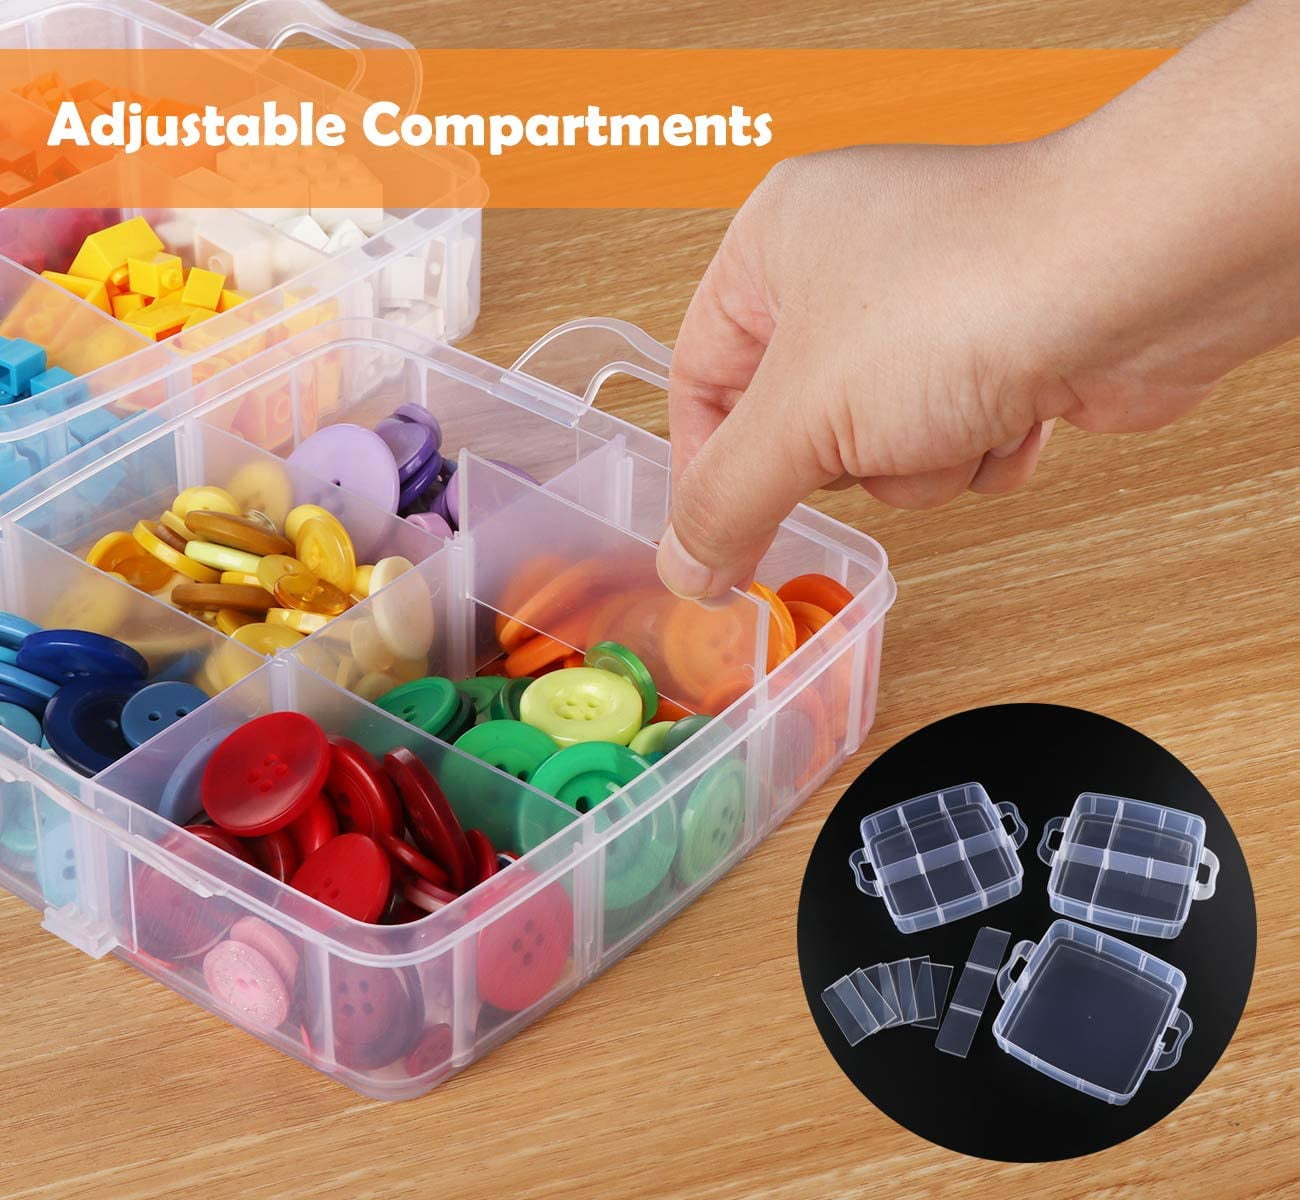 Plastic Multi-layers Portable Storage Container Box Handled Organizer  Storage Box for Organizing Stationery, Sewing, Art Craft, Jewelry and  Beauty